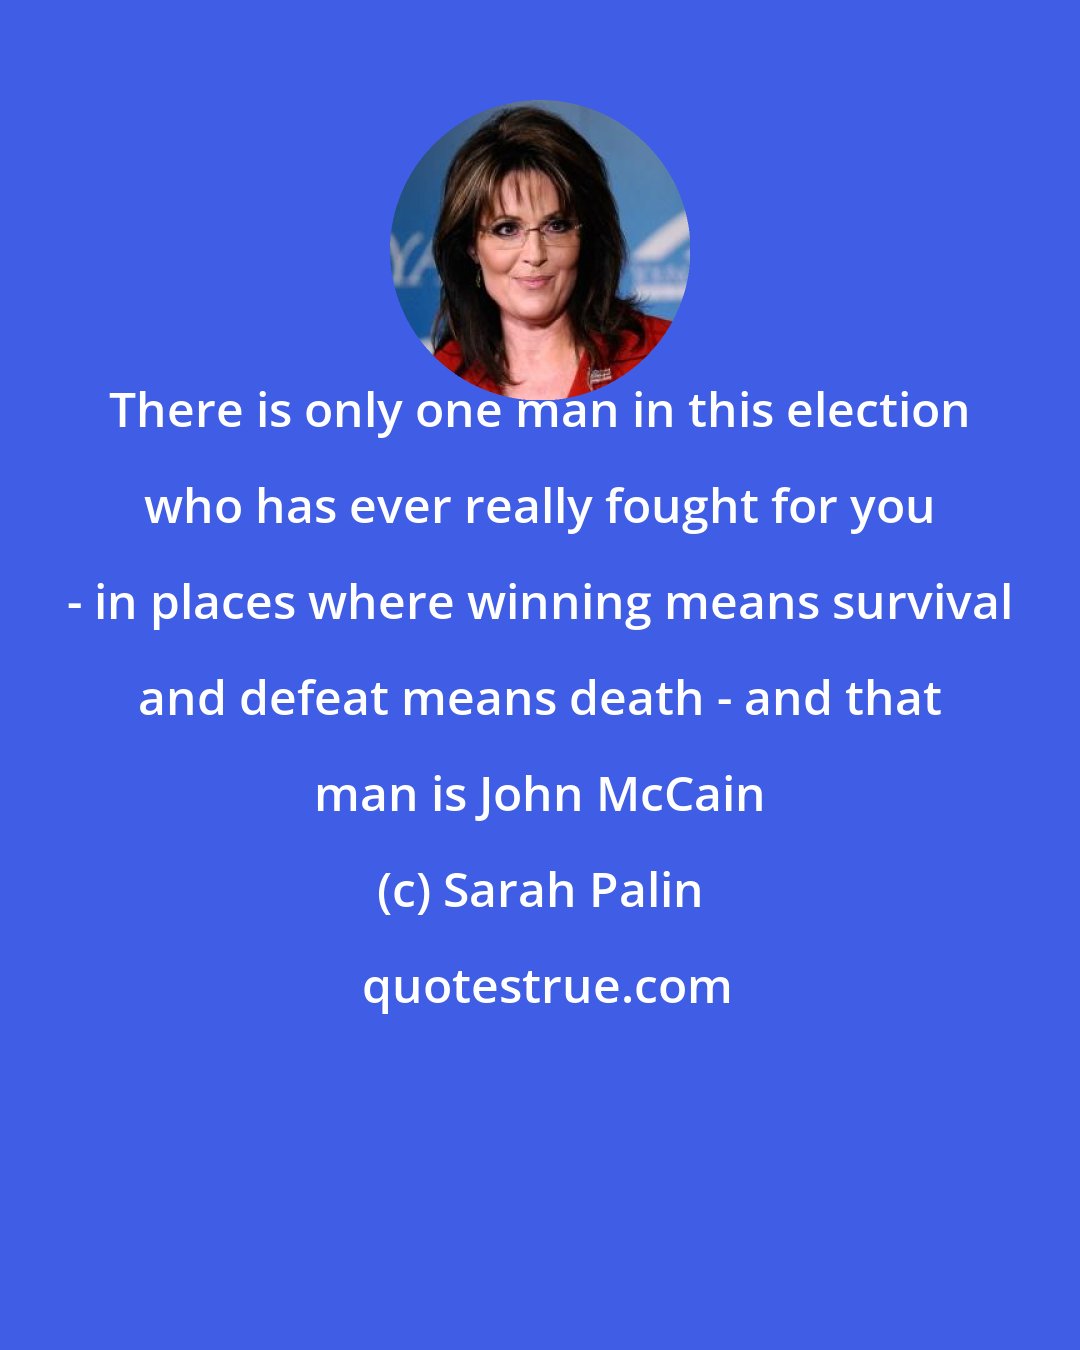 Sarah Palin: There is only one man in this election who has ever really fought for you - in places where winning means survival and defeat means death - and that man is John McCain